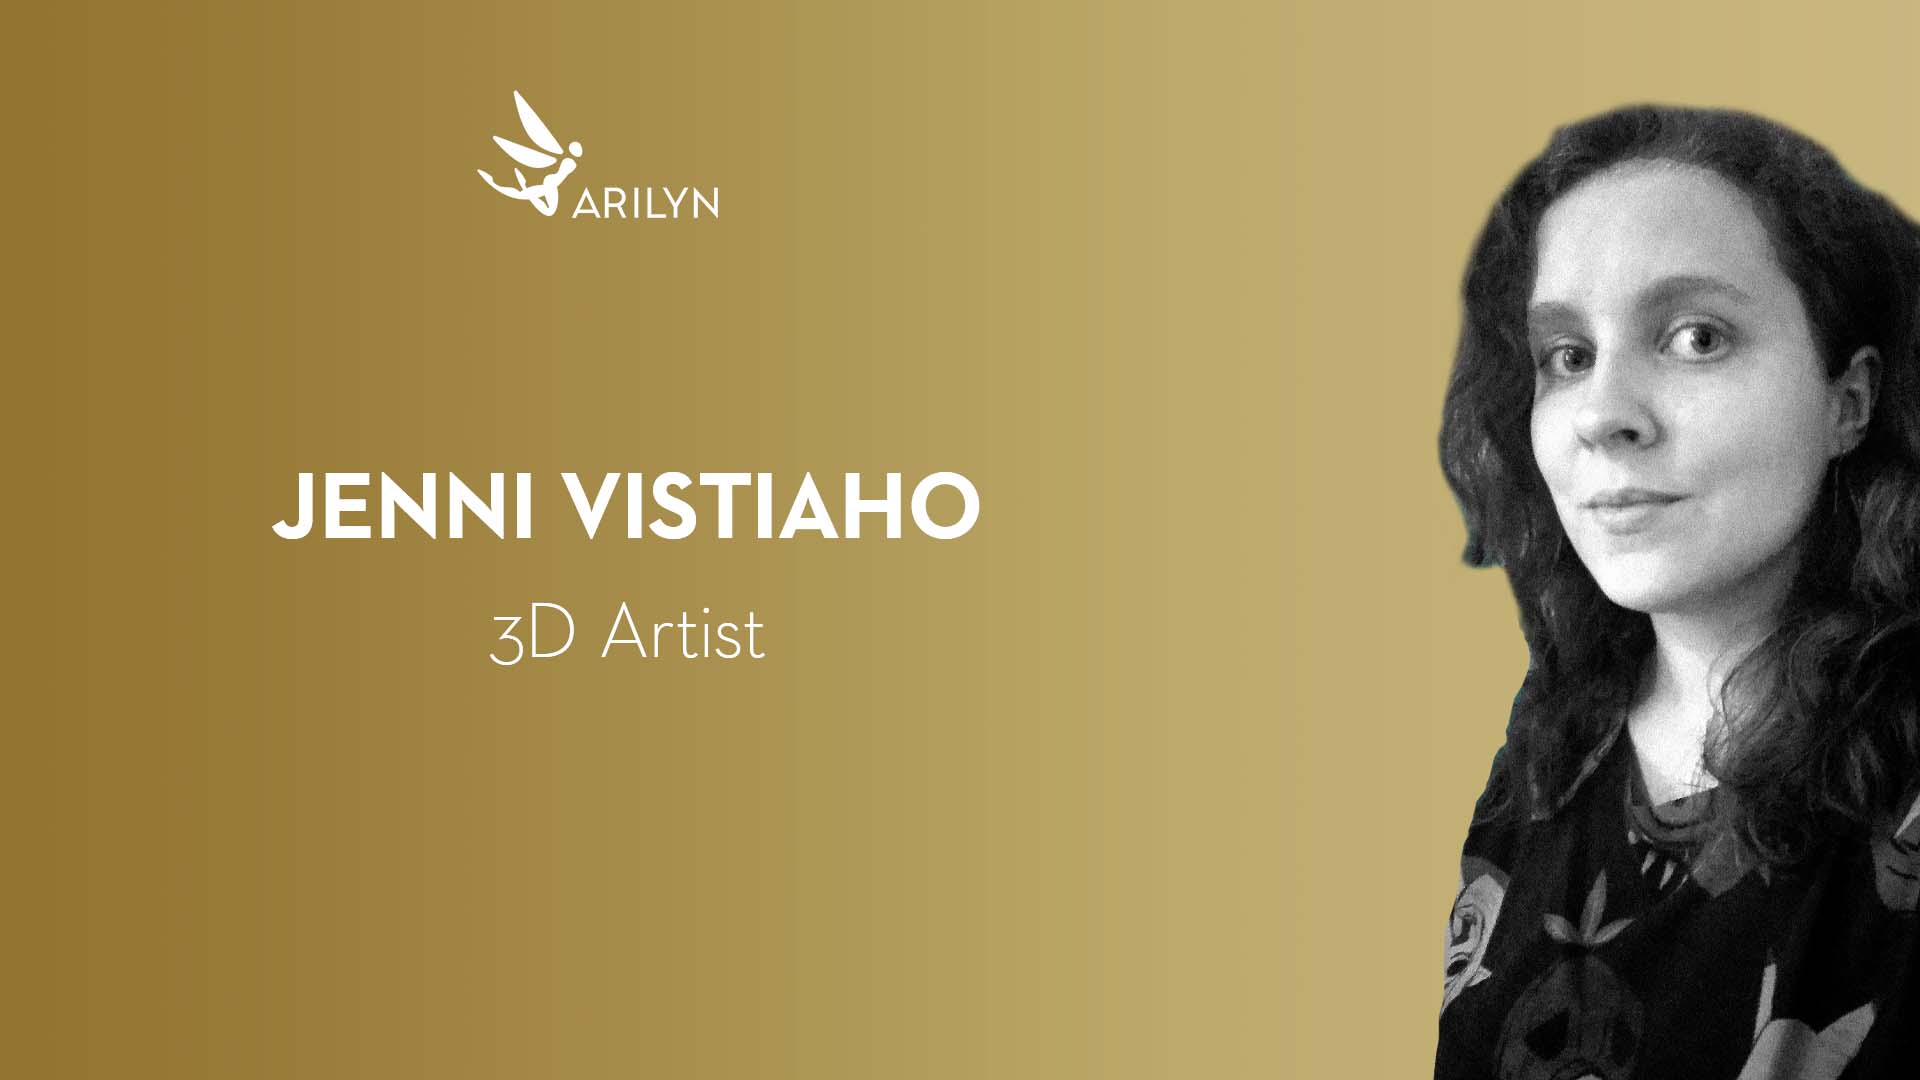 Get to know Arilyn – Jenni, 3D Artist Trainee